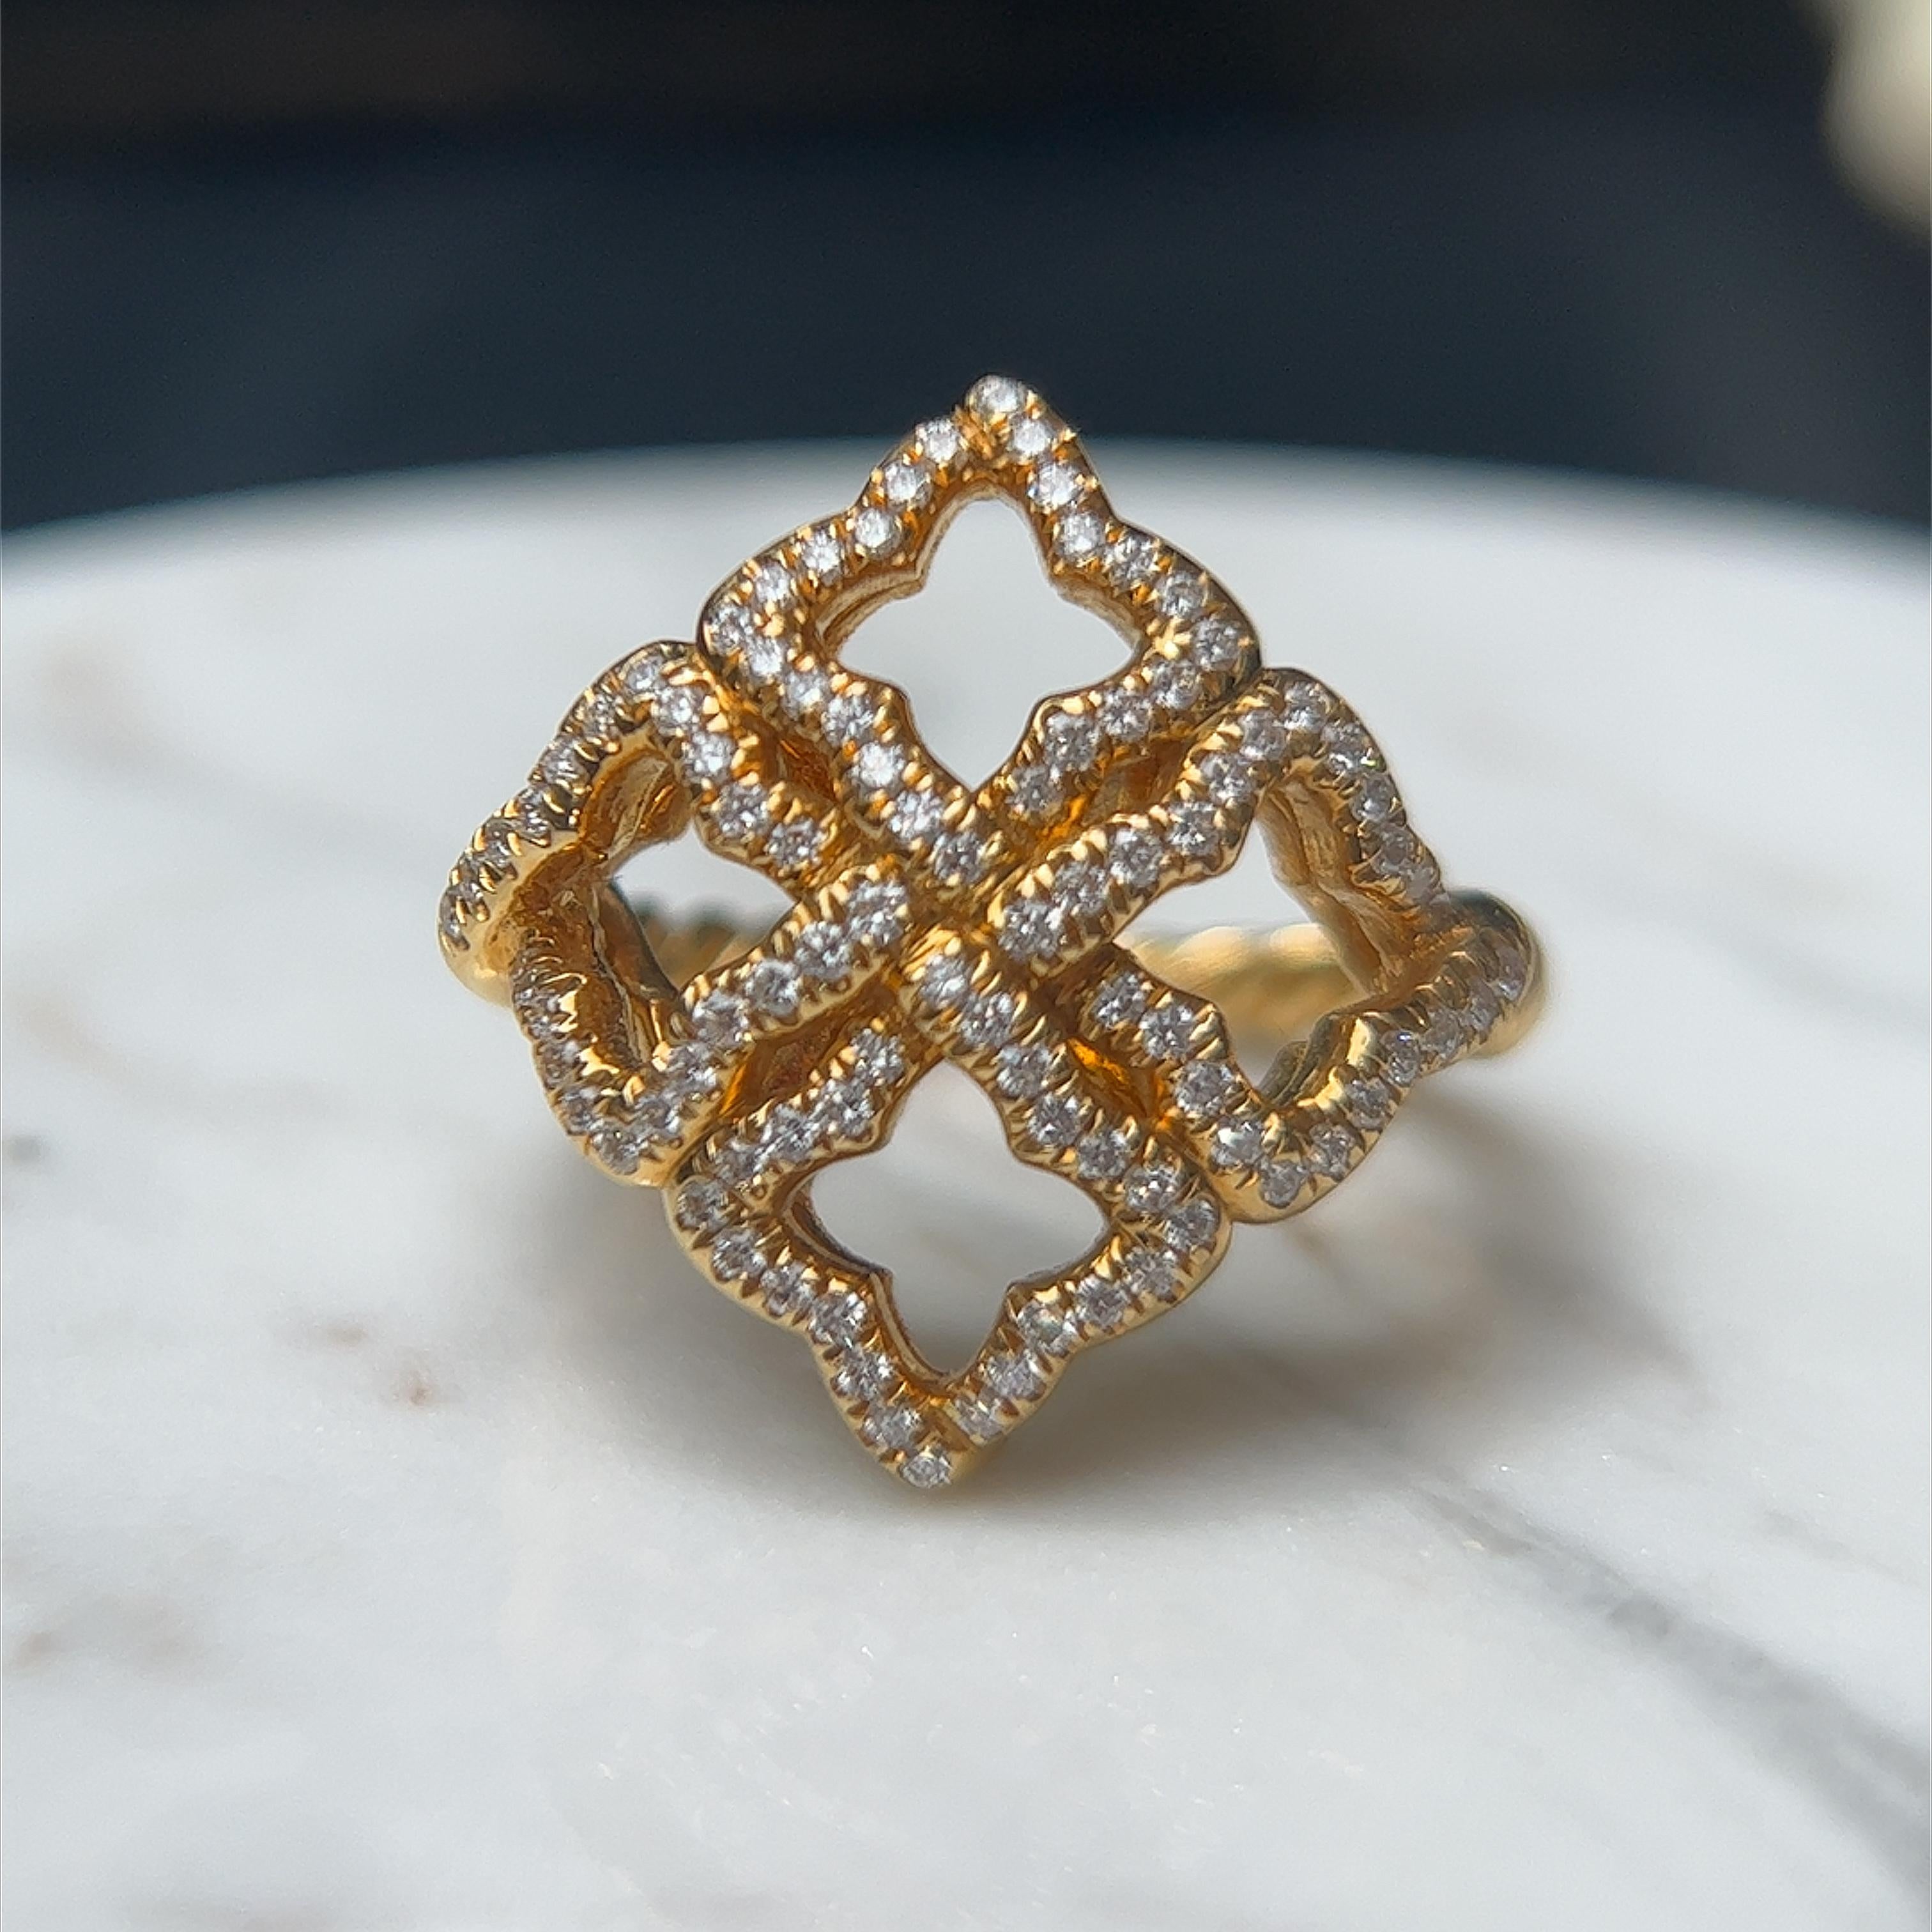 One David Yurman Quatrefoil 18 karat yellow gold ring set with ninety-two round brilliant cut diamonds, approximately 1.00 carat total weight with matching G/H color and VS1 clarity. The ring is stamped D. Y 750 and is a finger size 6.25.
